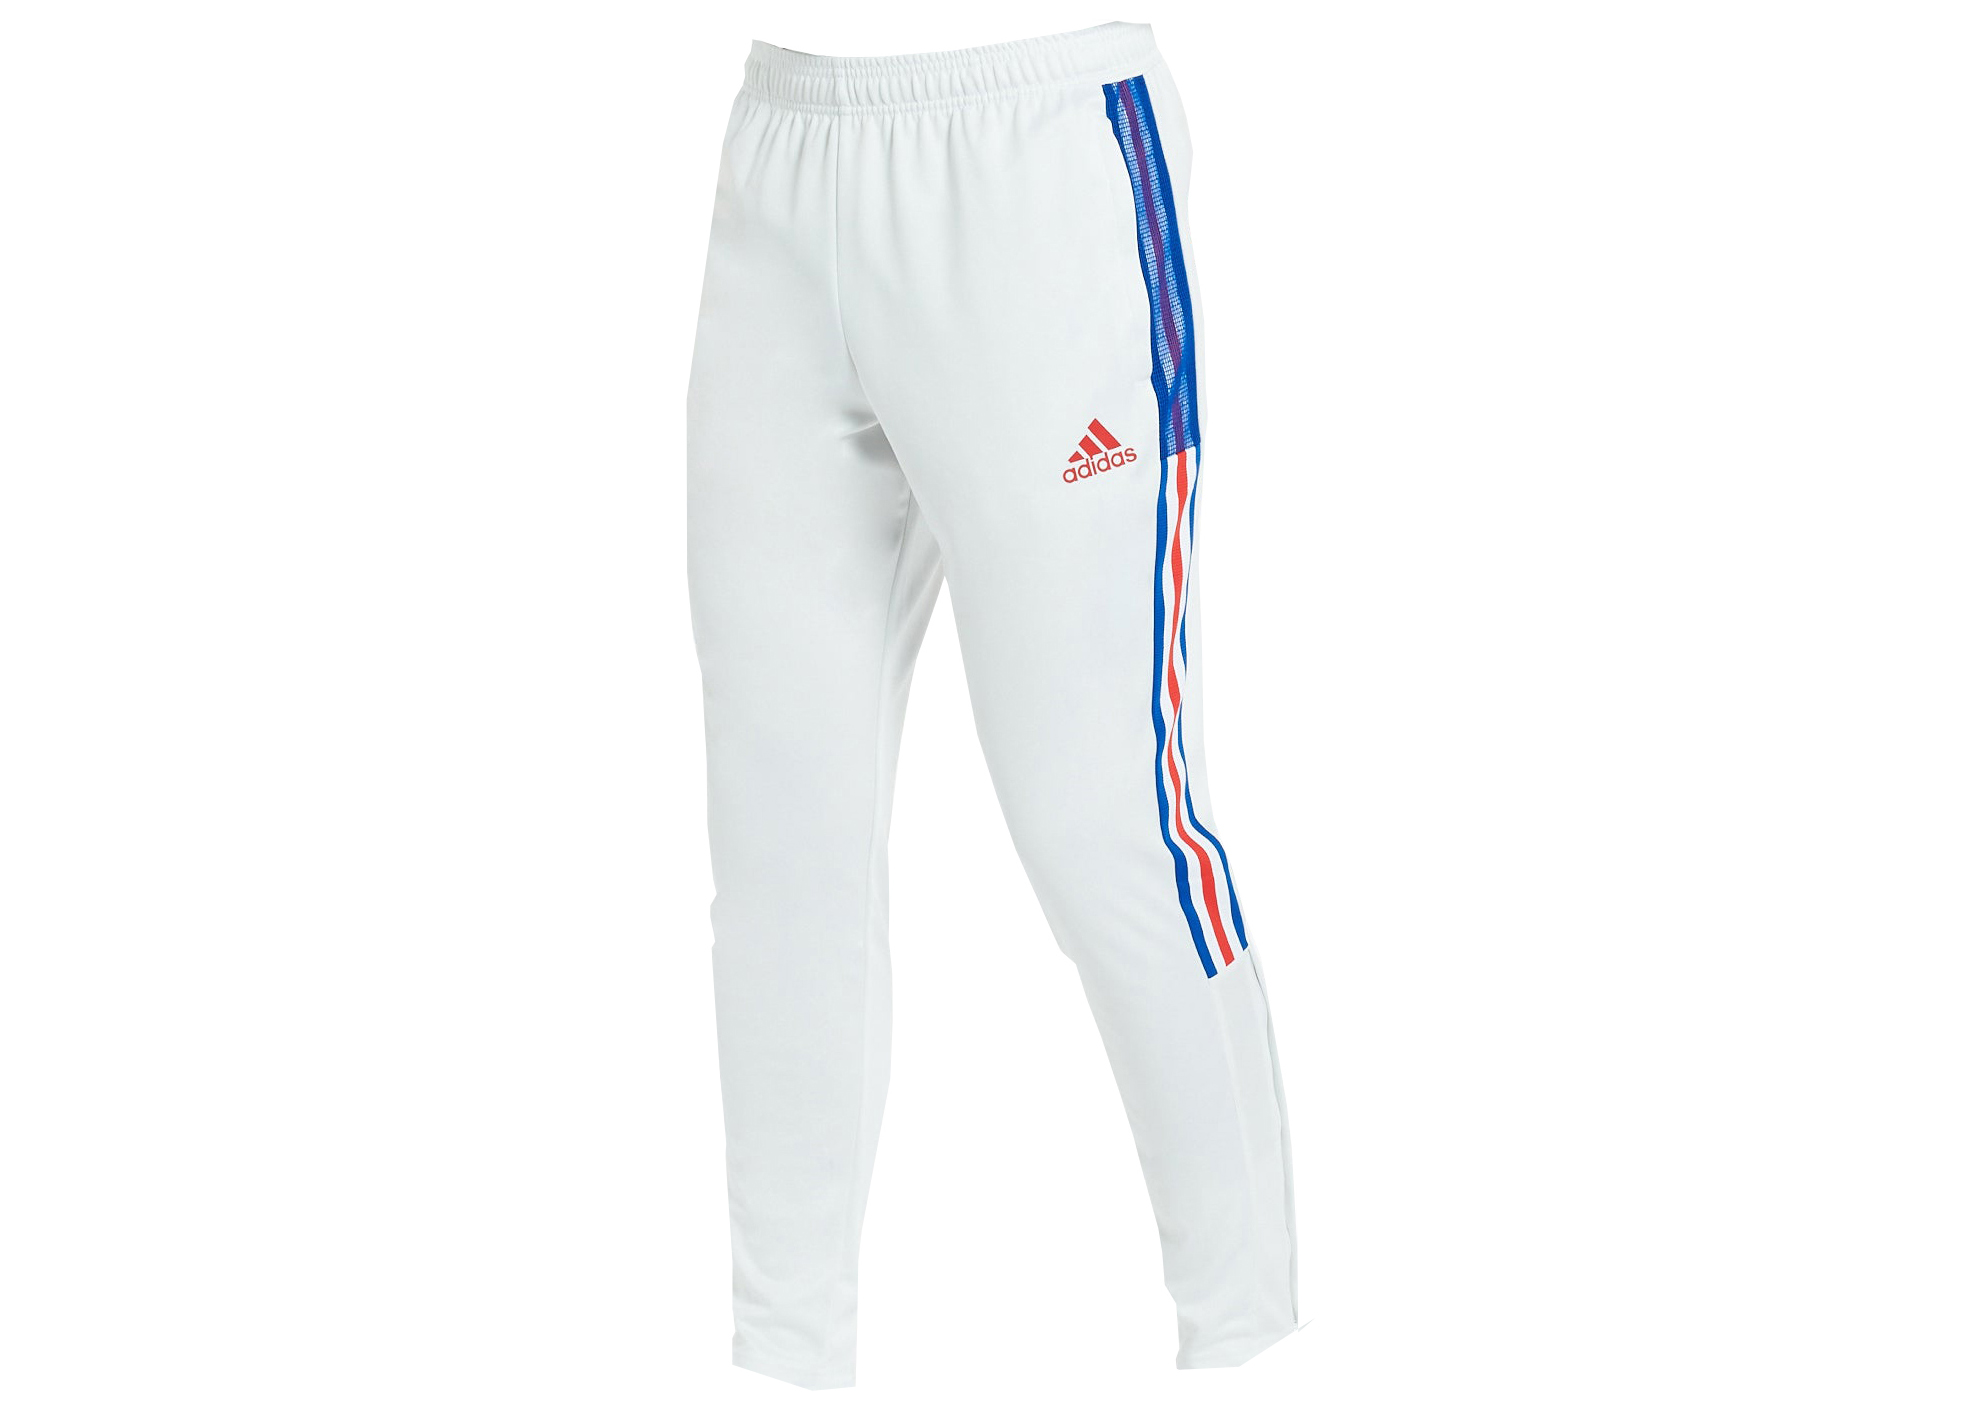 adidas Royal Blue Track Pants | Urban Outfitters UK